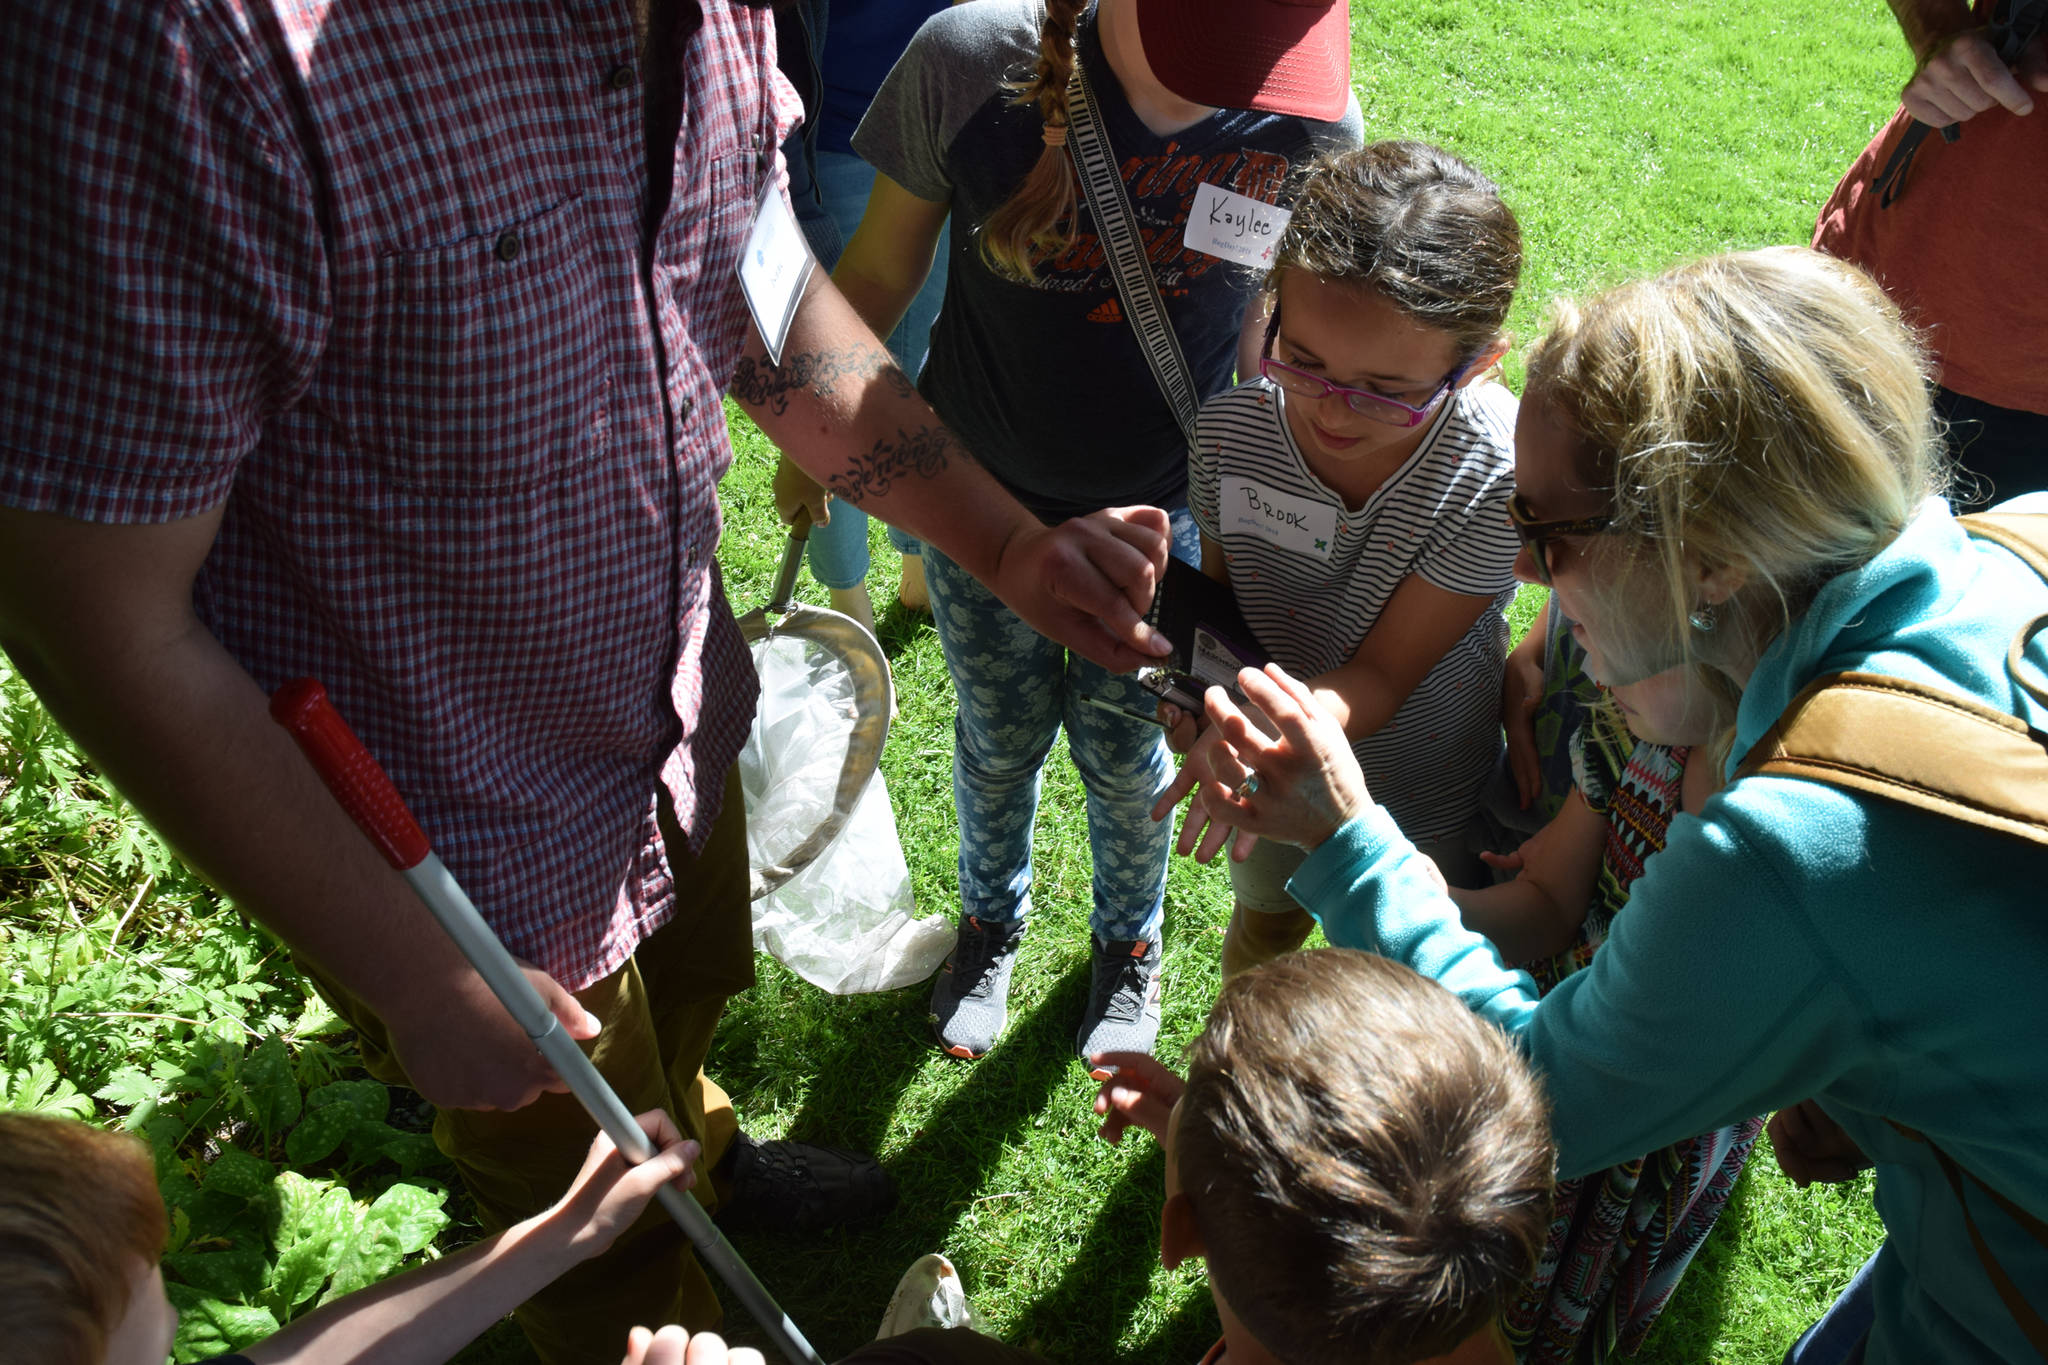 U.S. Forest Service technician Isaac Davis shows kids a dragonfly during Bug Day at the Jensen-Olson Arboretum on Saturday, Aug. 11, 2018. (Kevin Gullufsen | Juneau Empire)